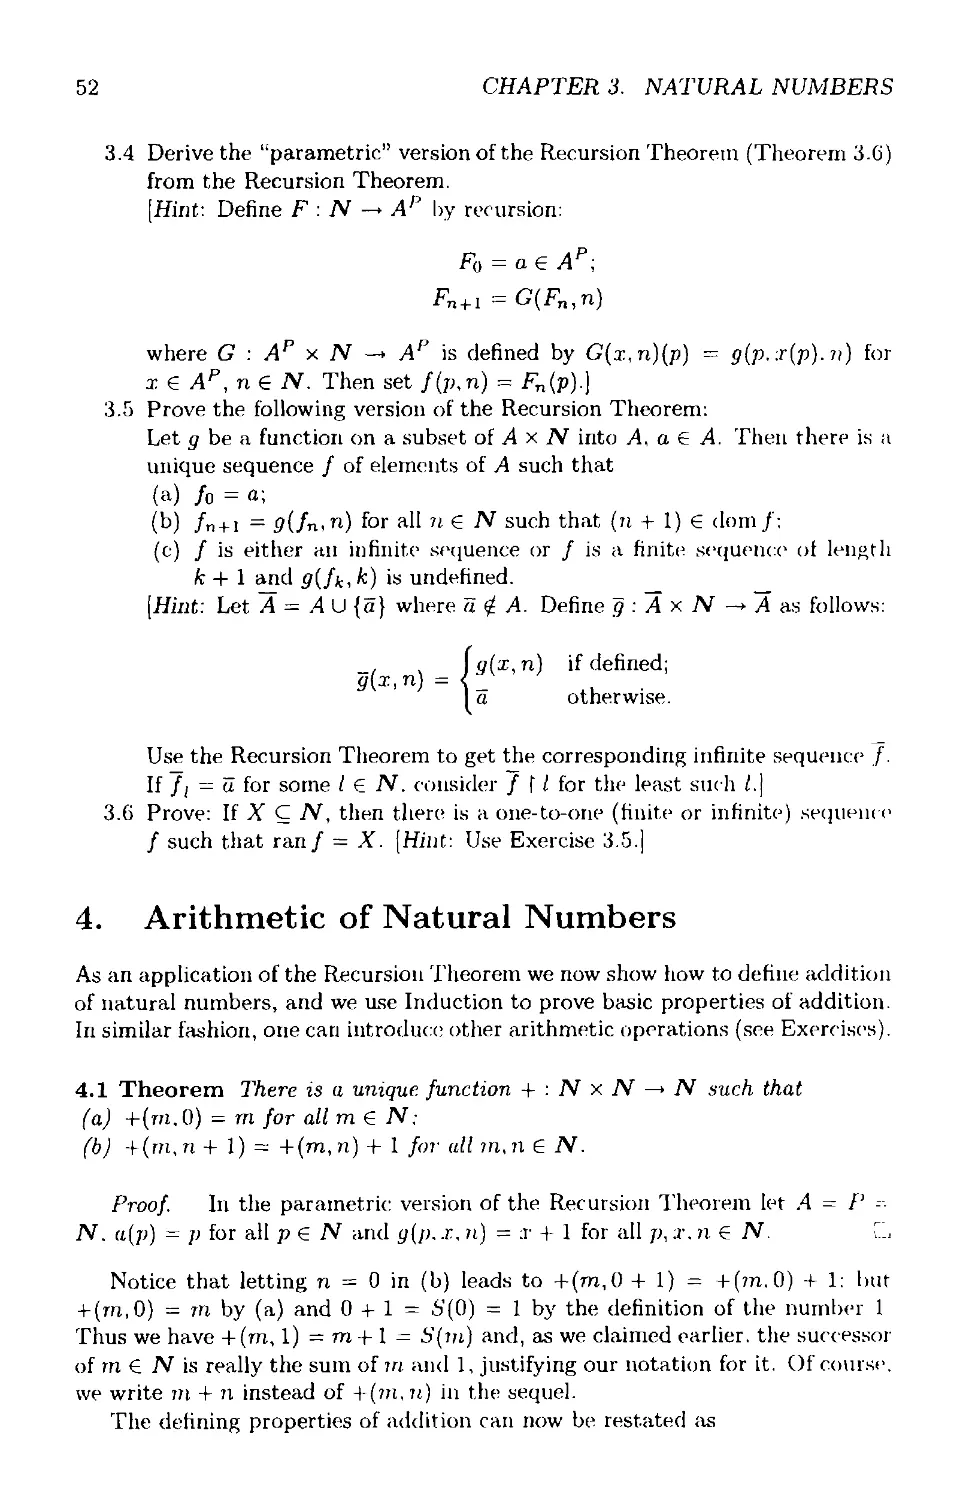 4 Arithmetic of Natural Numbers